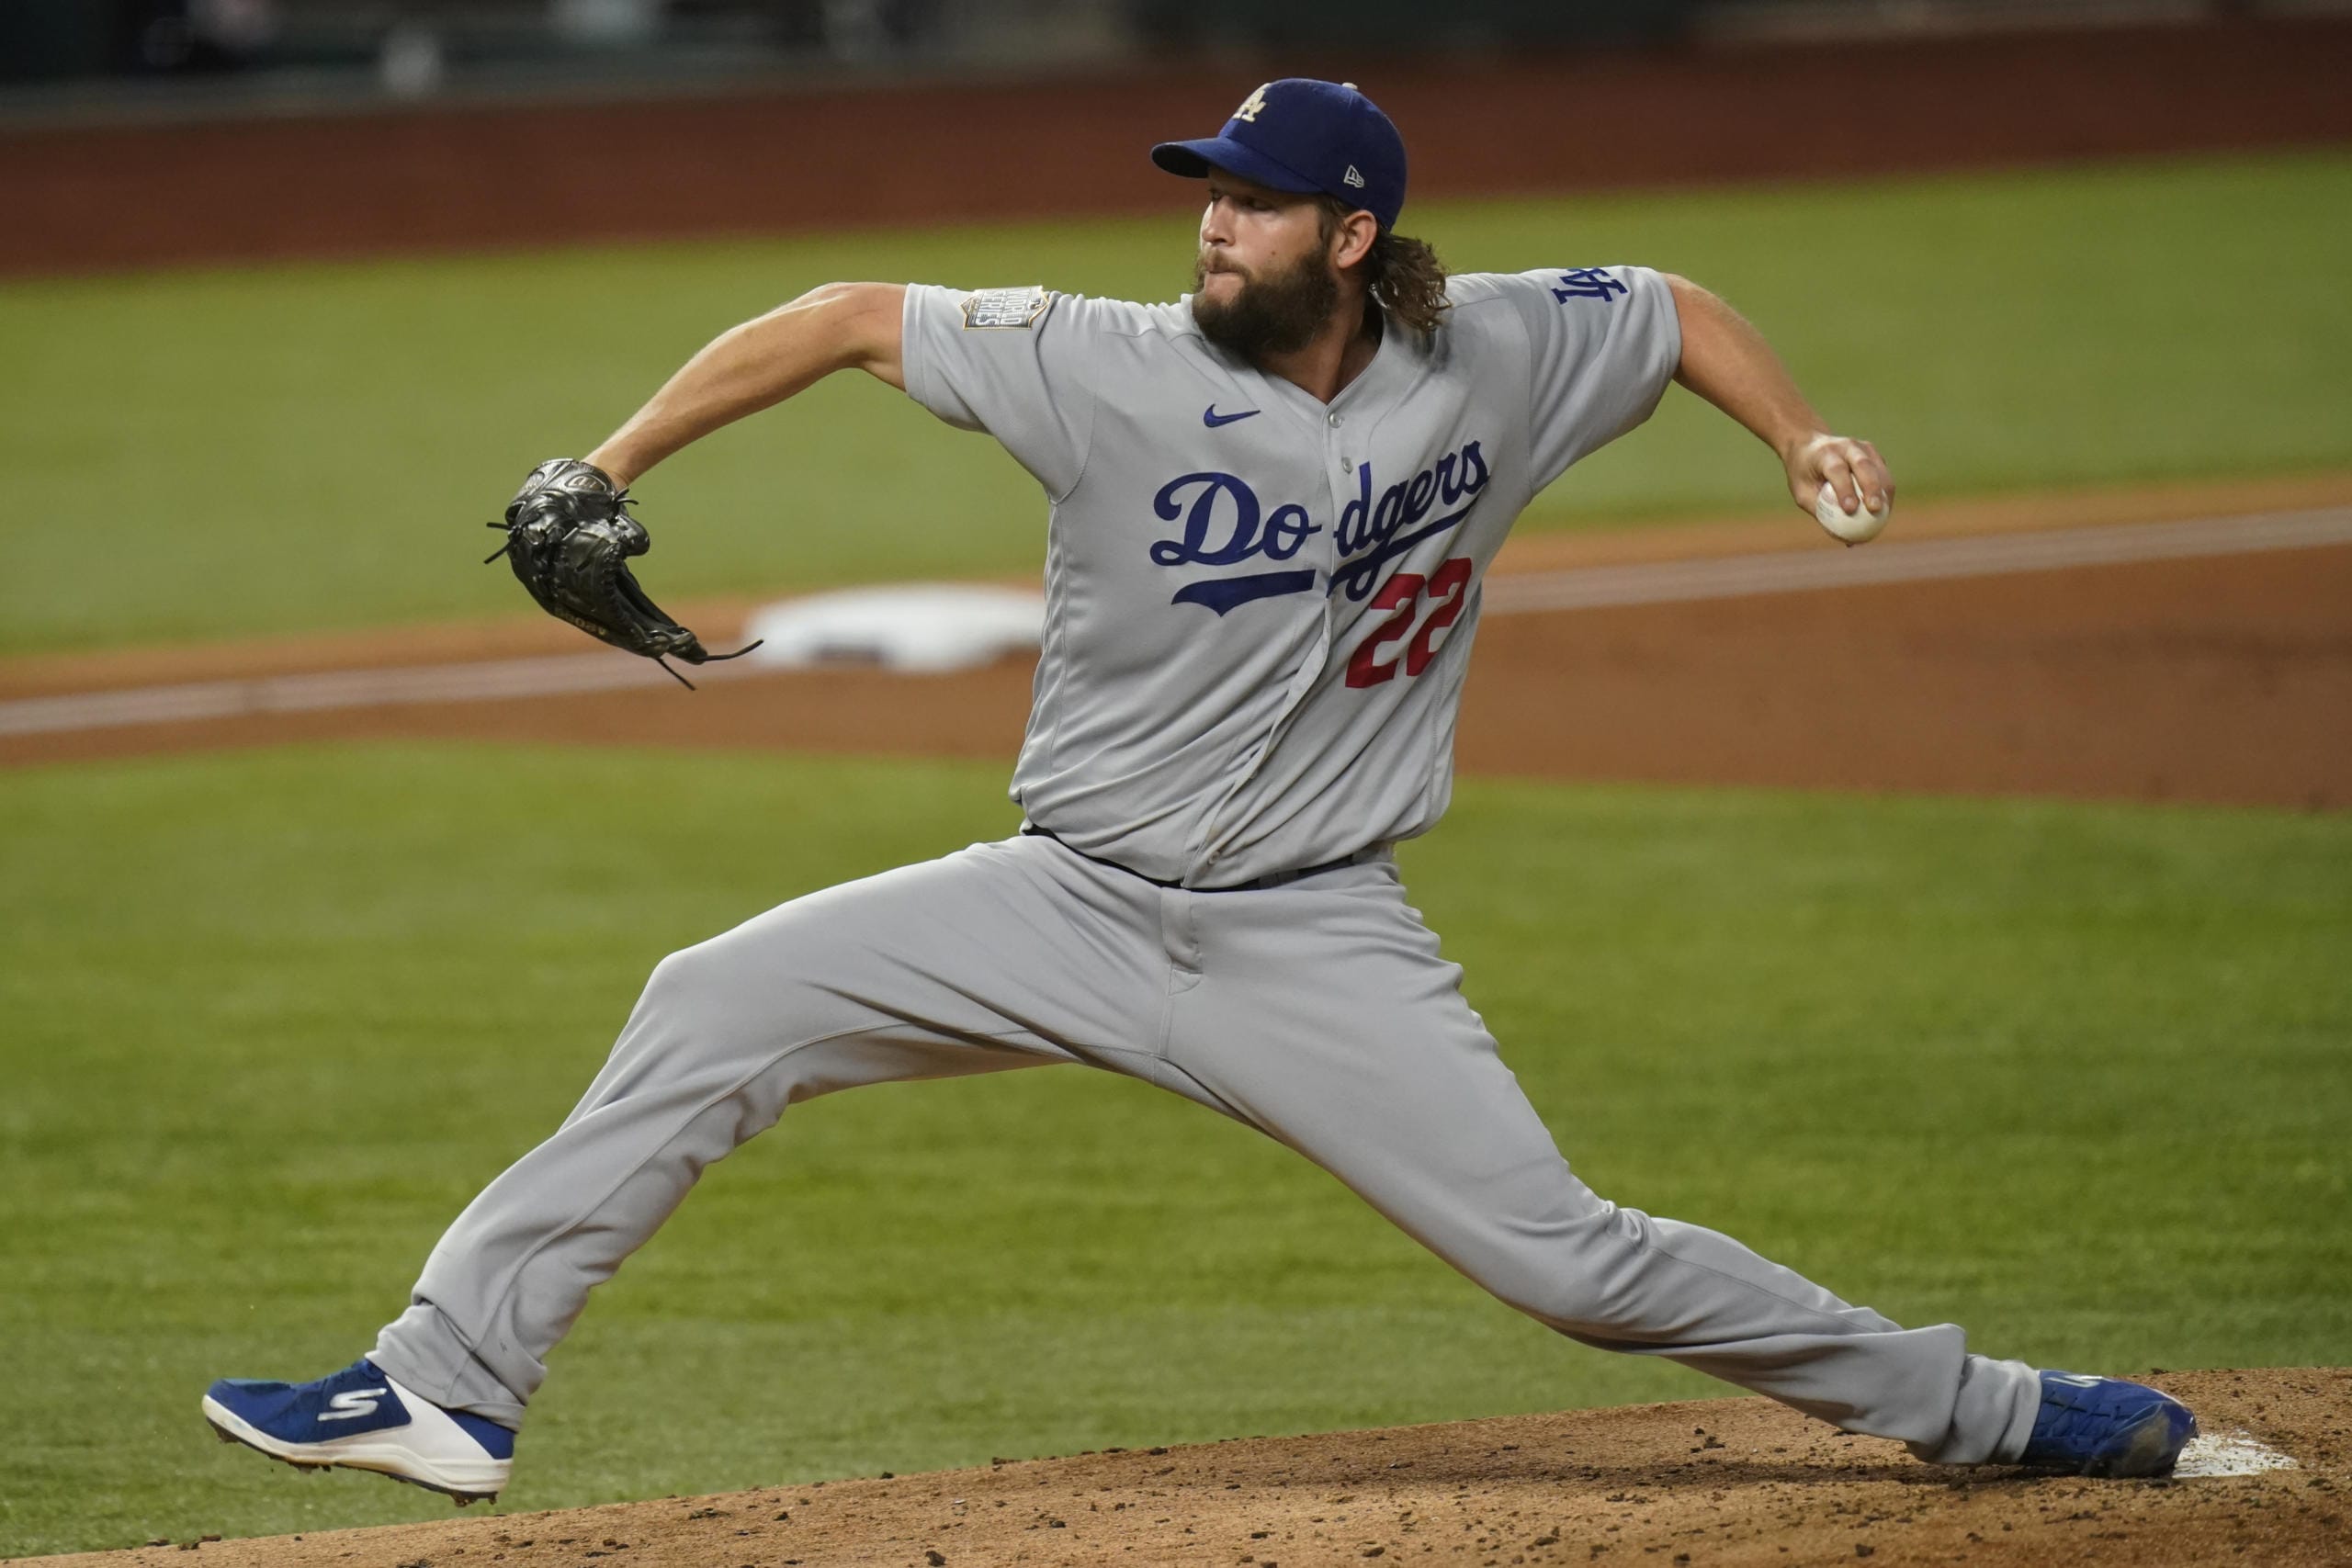 Los Angeles Dodgers starting pitcher Clayton Kershaw throws against the Tampa Bay Rays during the first inning in Game 5 of the baseball World Series Sunday, Oct. 25, 2020, in Arlington, Texas.